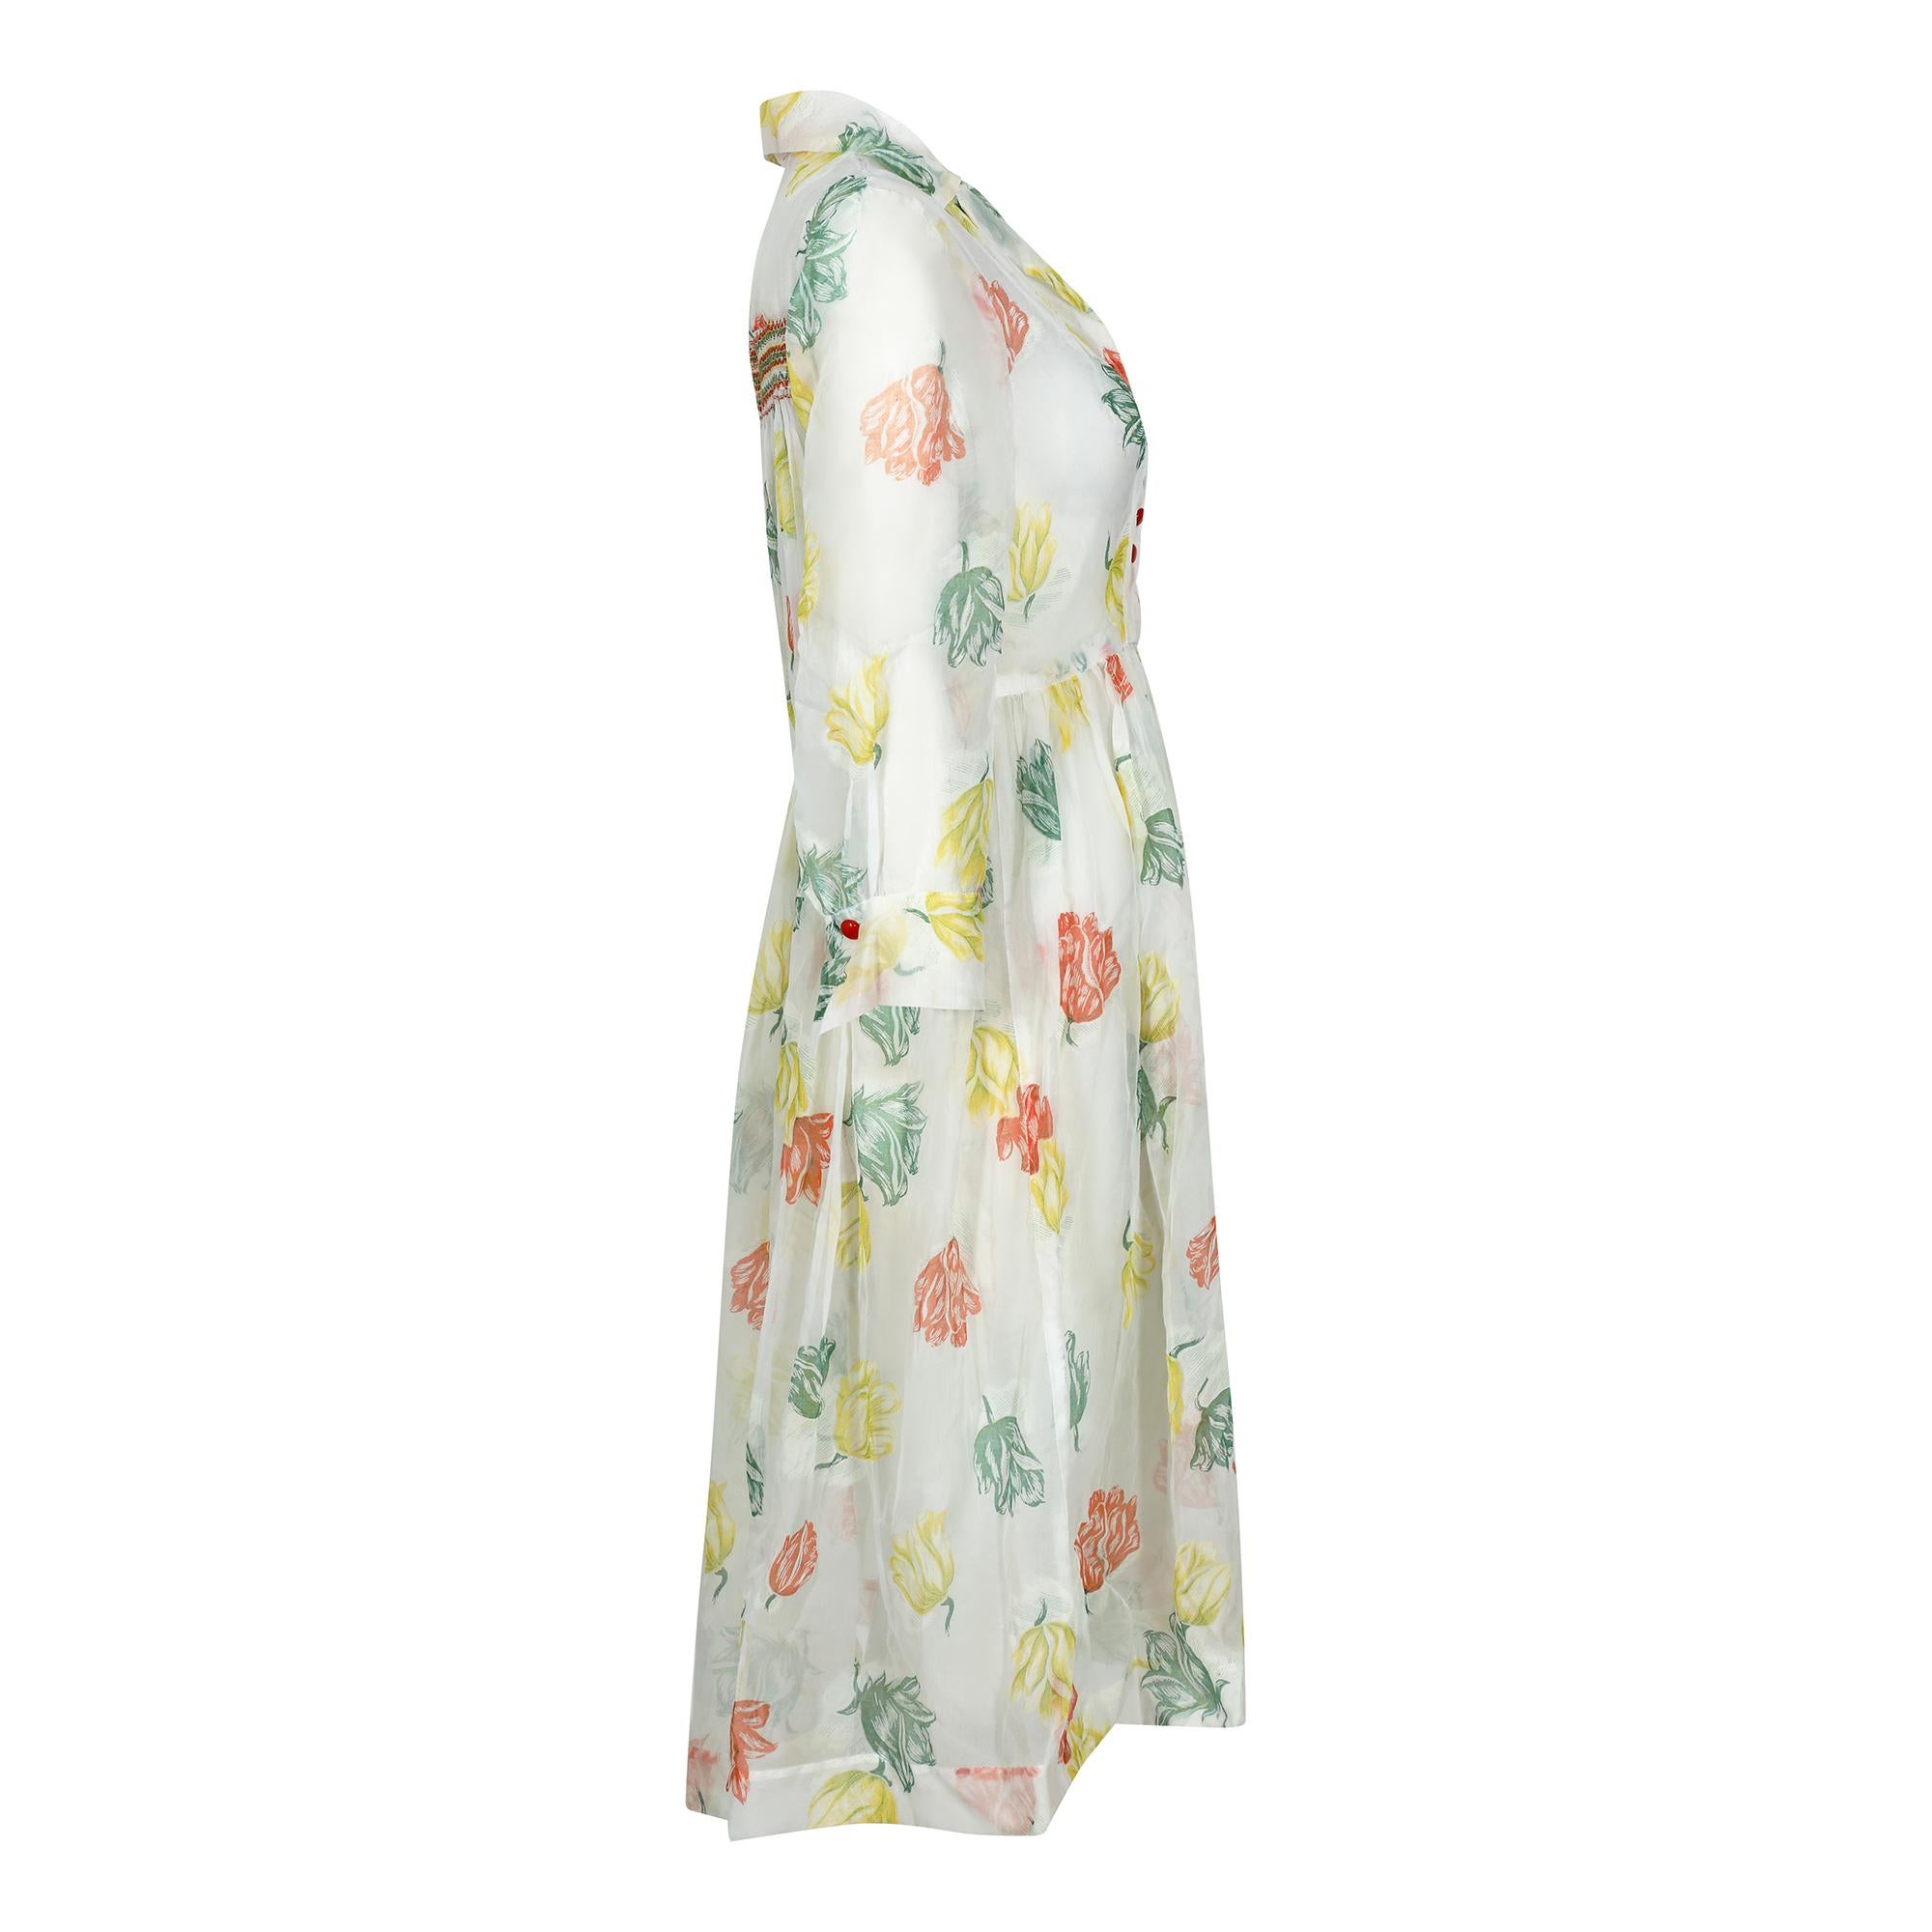 This is a really beautiful and original late 1950s or early 1960s organza floral print shirtwaister dress. The floral print, which we identify as tulips but could also be rose, is in mid-century colours of orange, green and yellow. The dress is a